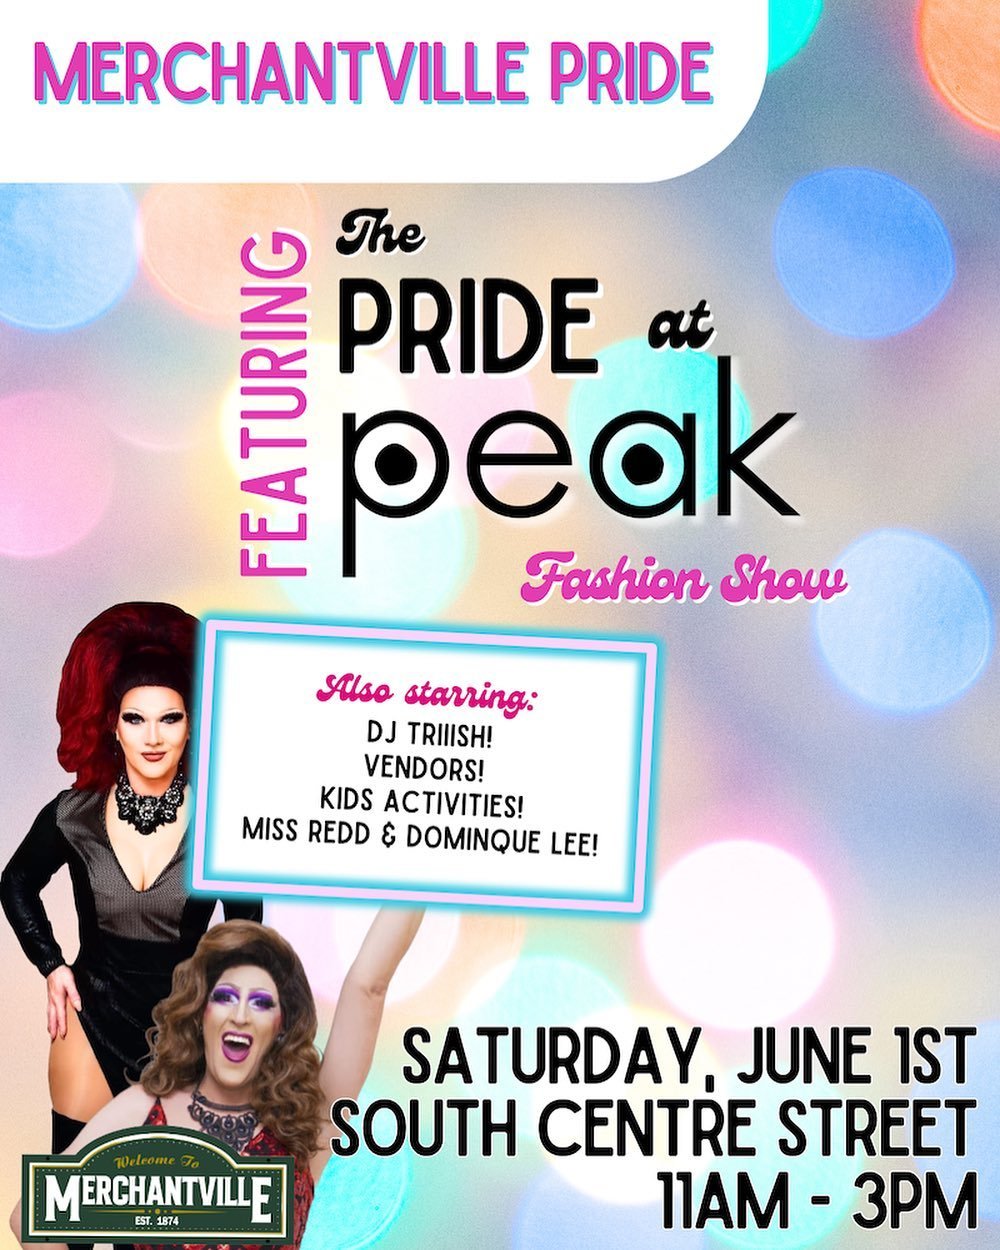 One month away!!! Saturday June 1st Merchantville Pride feat Pride at Peak Fashion Show! Performances from Philly Drag Mafia&rsquo;s @itismedlee @ @im_missredd, music from DJ Triiish, and FASHION SHOW. 💕🎉 Want to model or know a friend who would? A